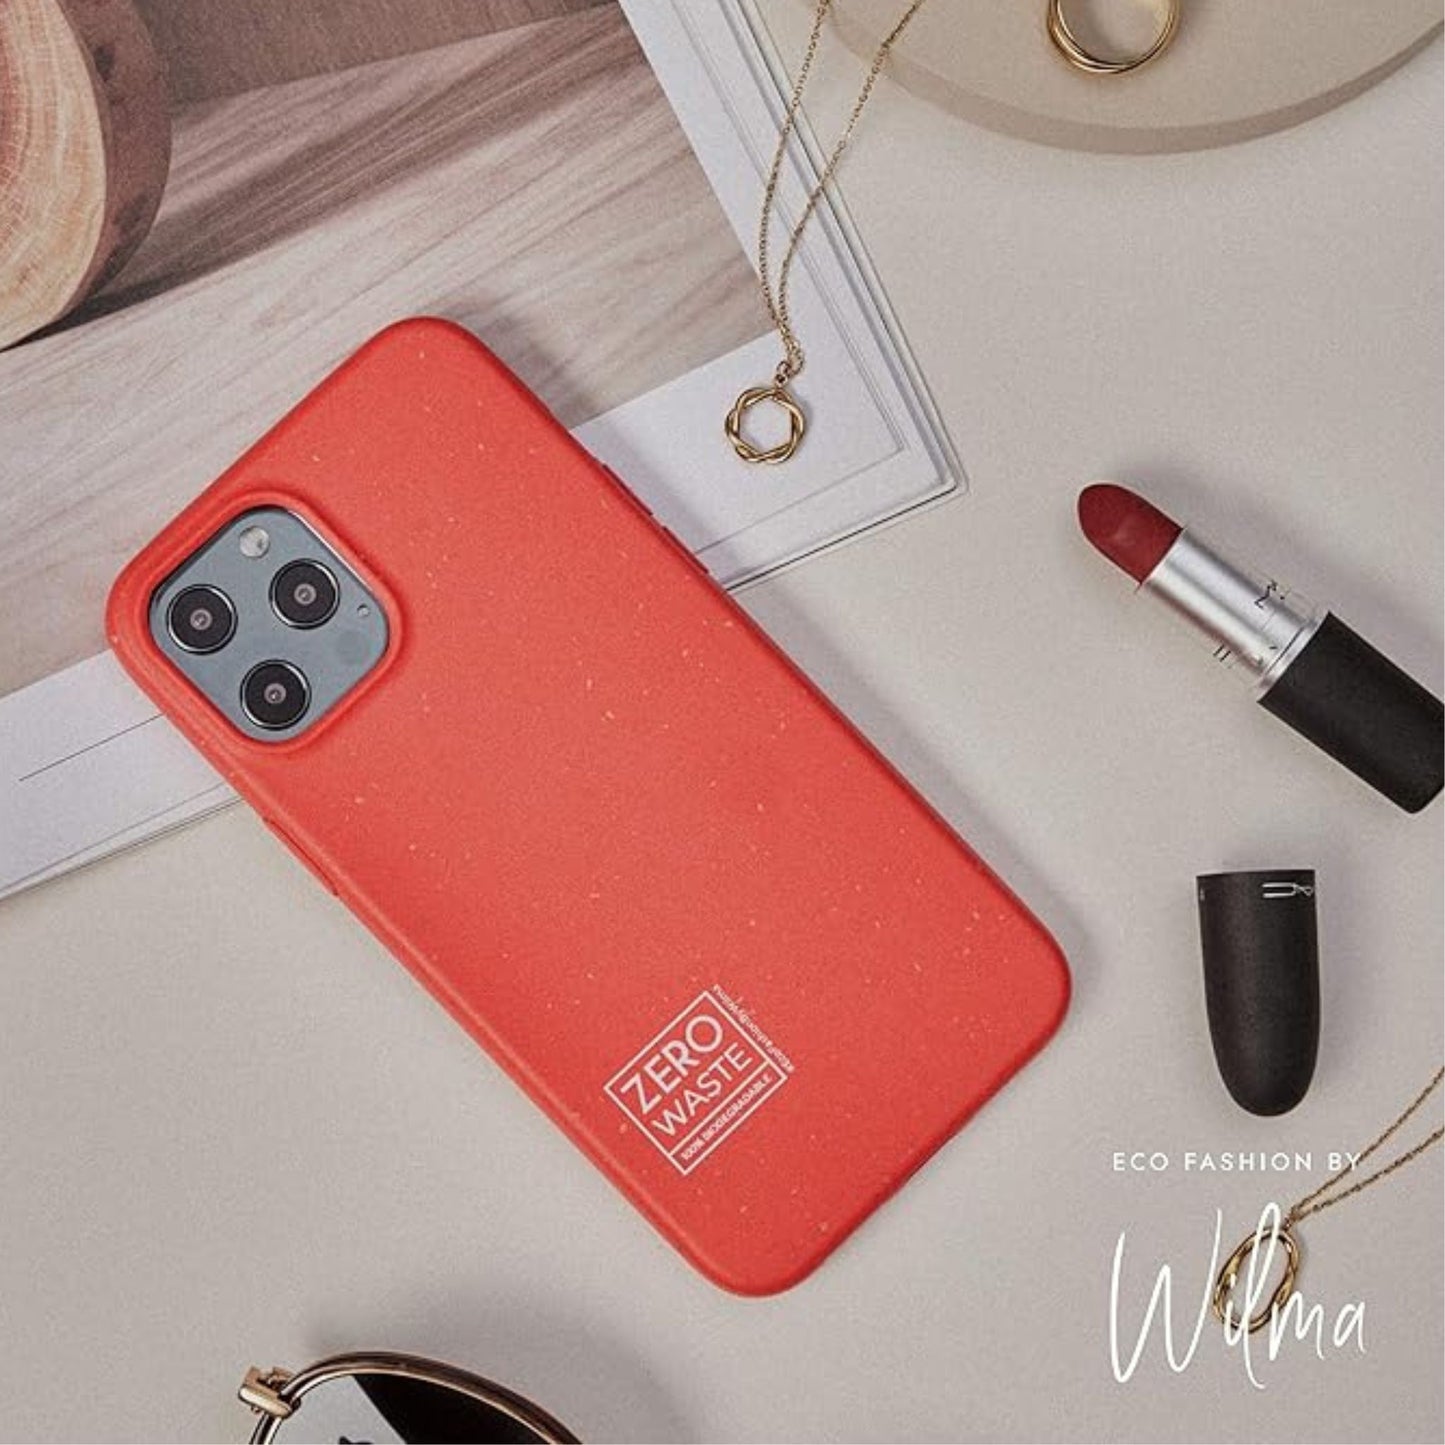 Wilma Biodegradable Compatible with iPhone 12 Mini Case, 5.4 Zot, Waste Free, Complete Protective Mobile Phone Case, Environmentally Friendly, Plastic Pollution, Plastic Free, Red